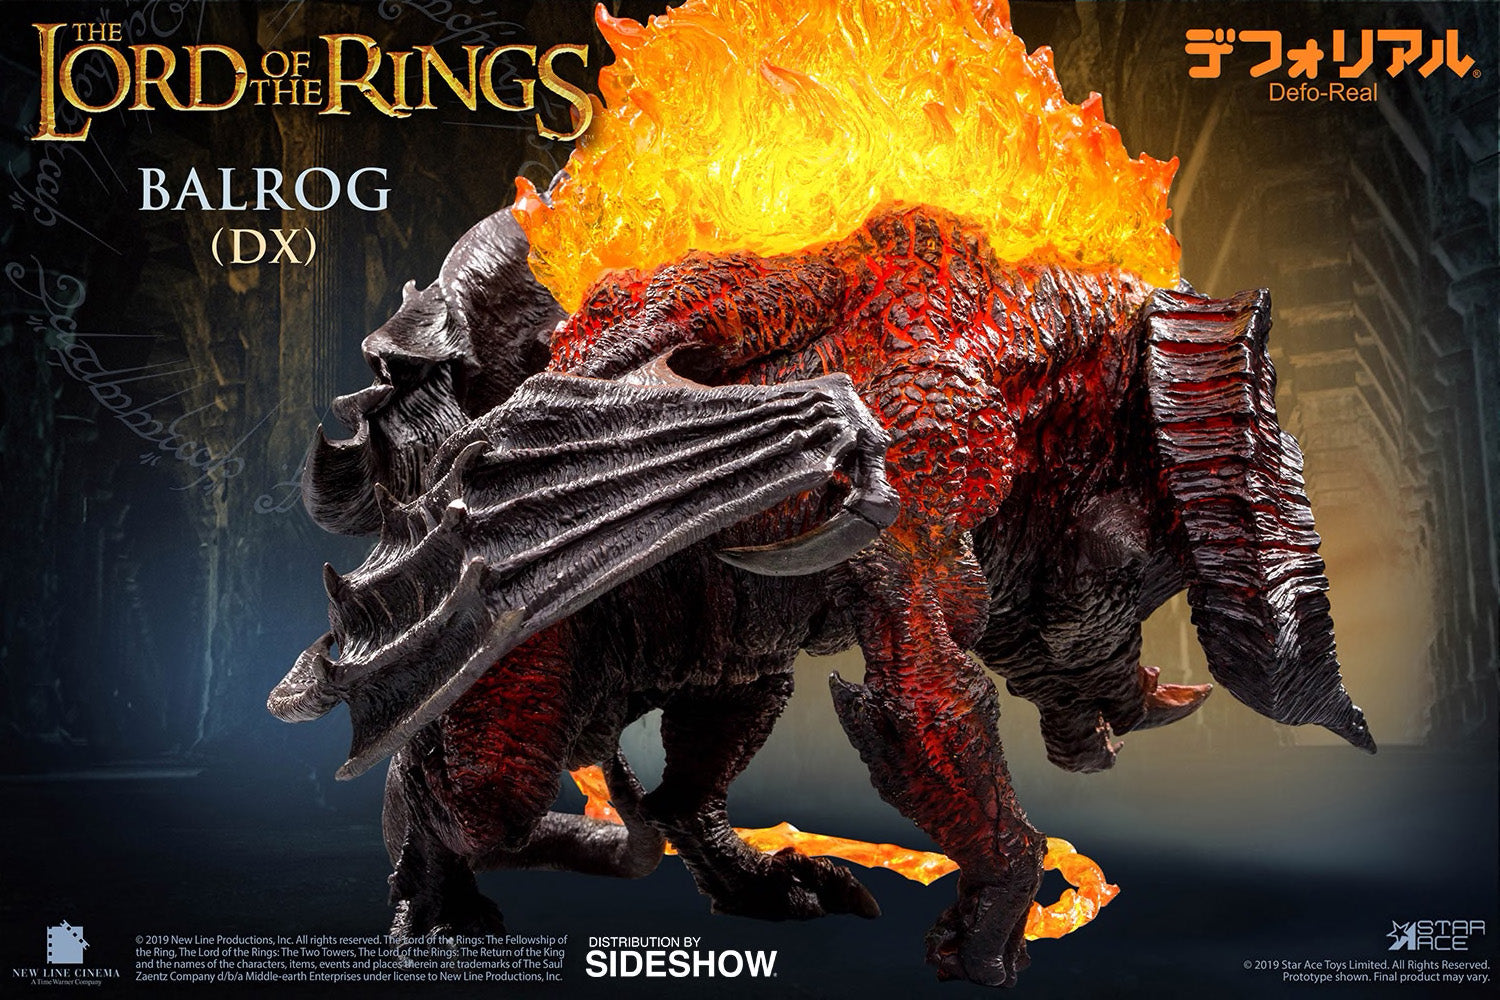 Star Ace Toys - Defo-Real - The Lord of the Rings - Balrog with Gandalf (DX) - Marvelous Toys